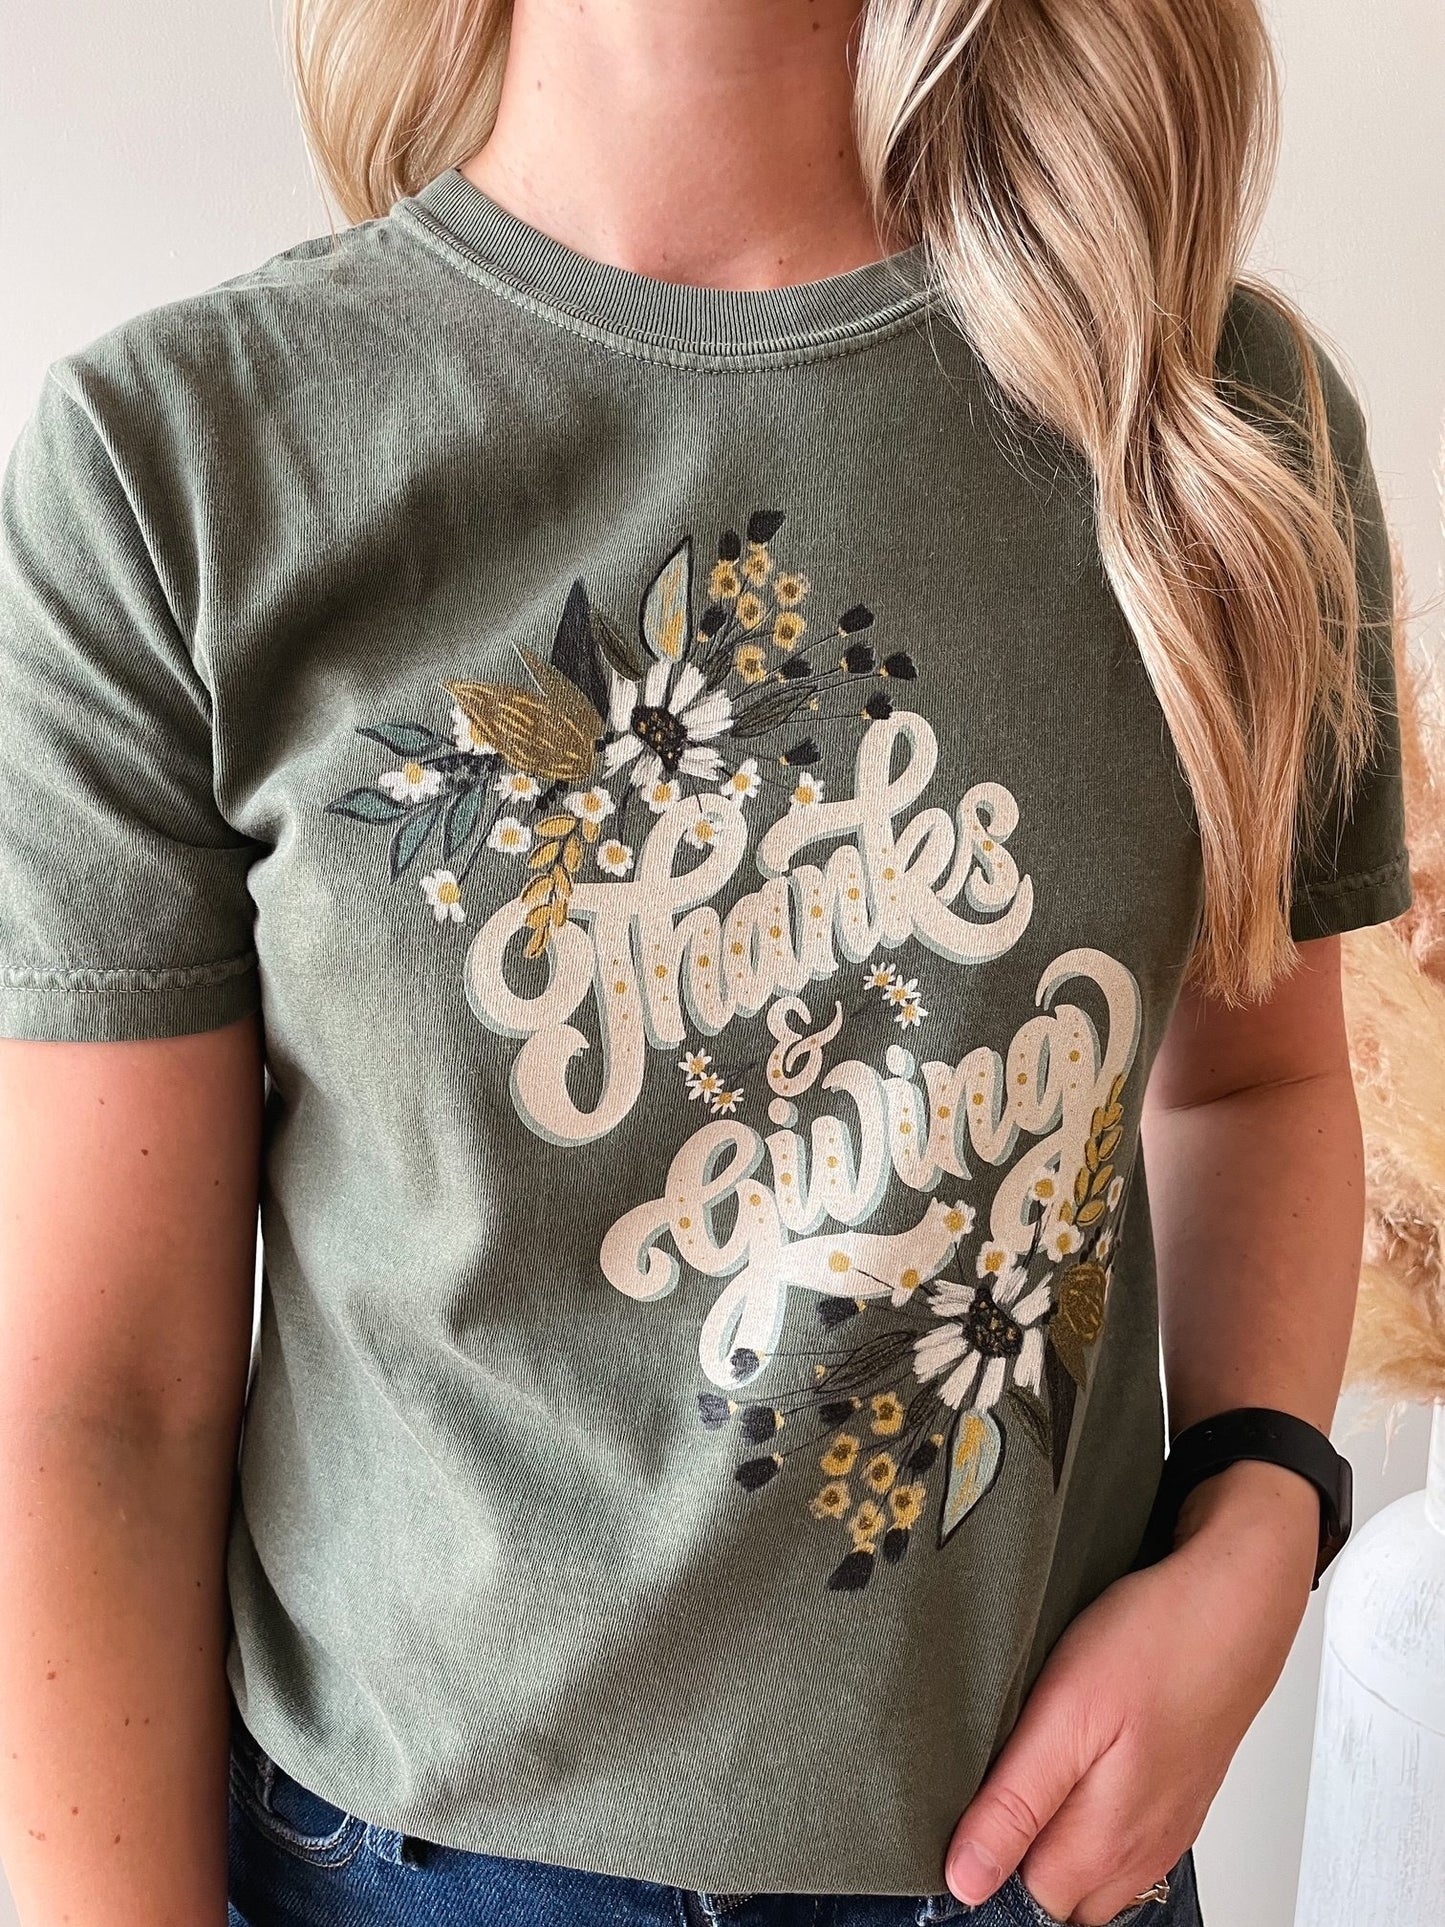 Thanks + Giving Graphic Tee